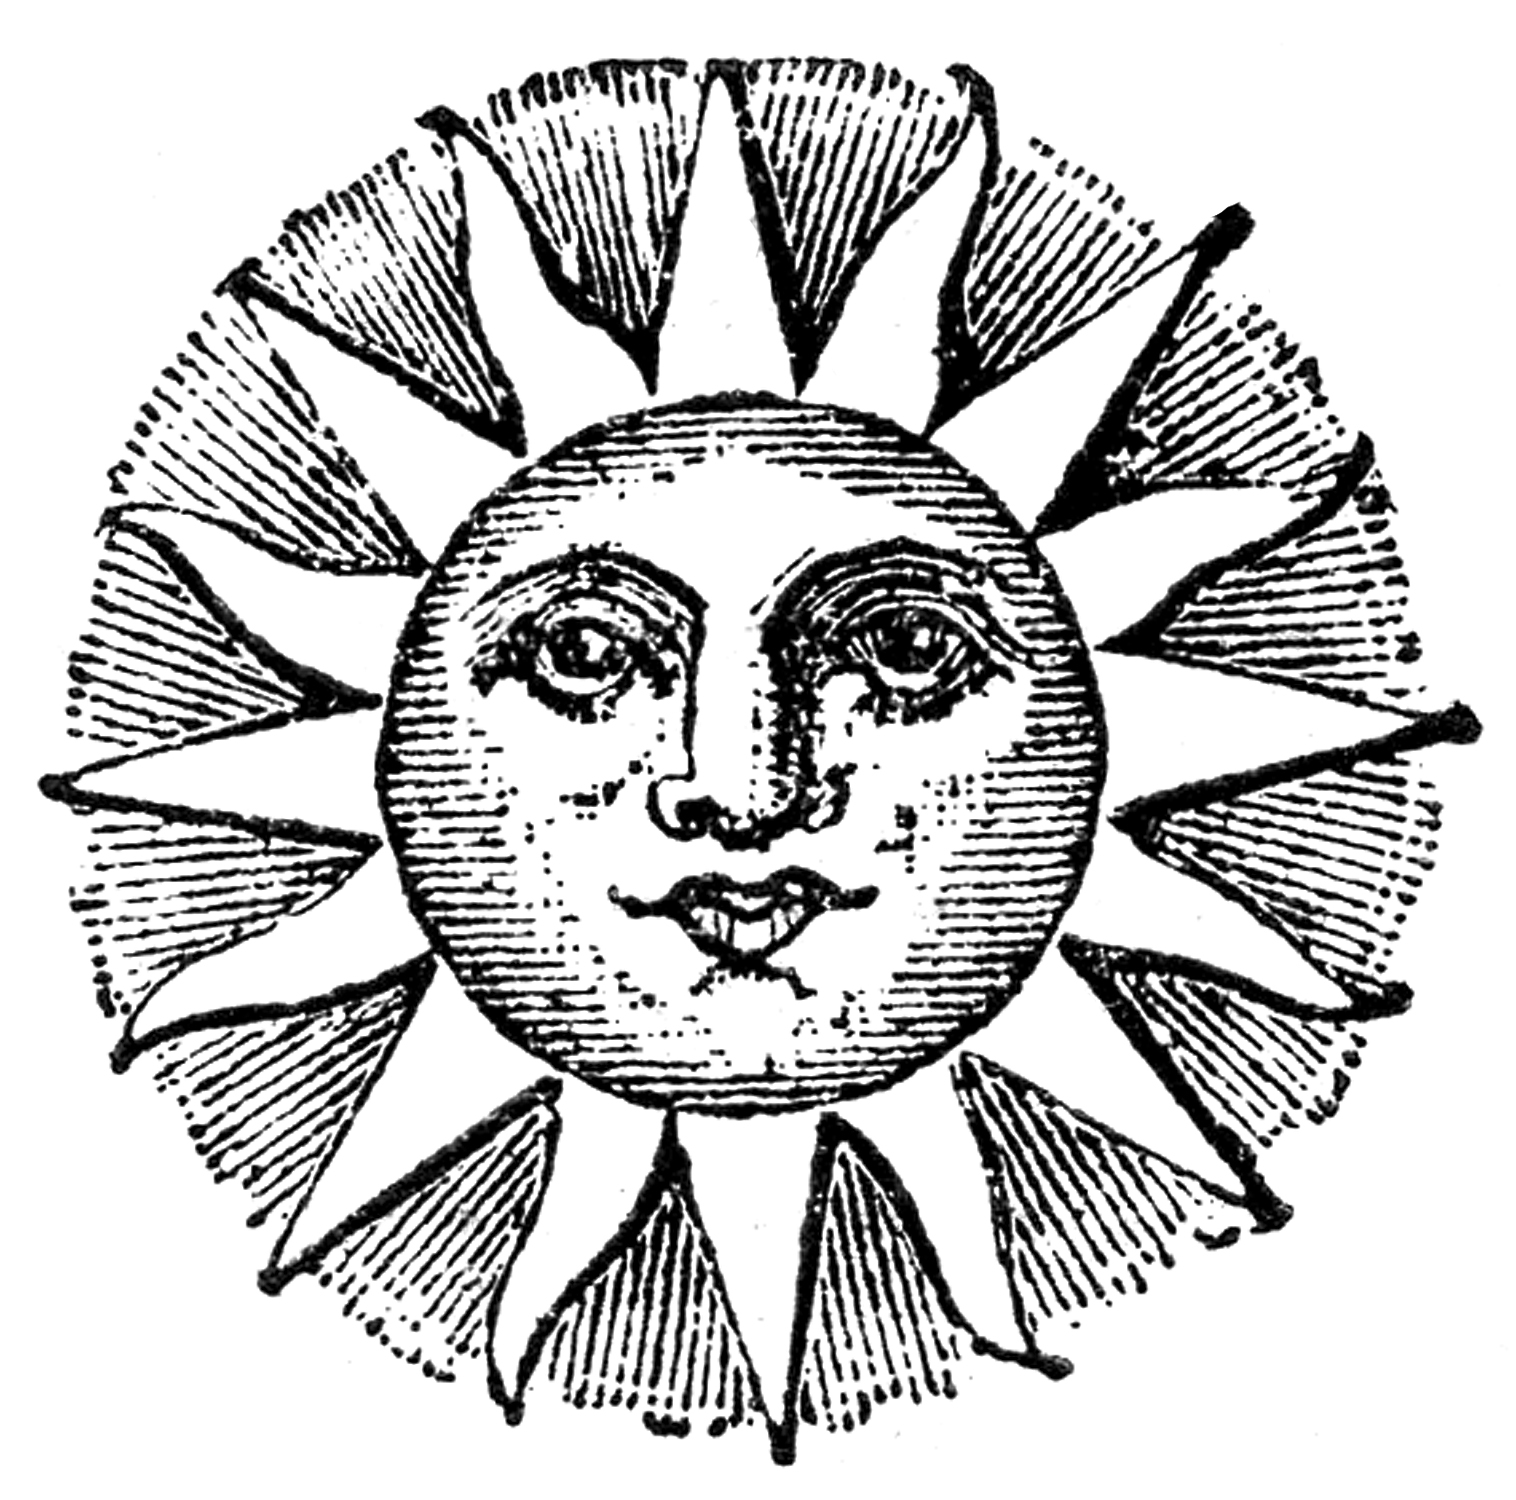 sun clipart images for kids